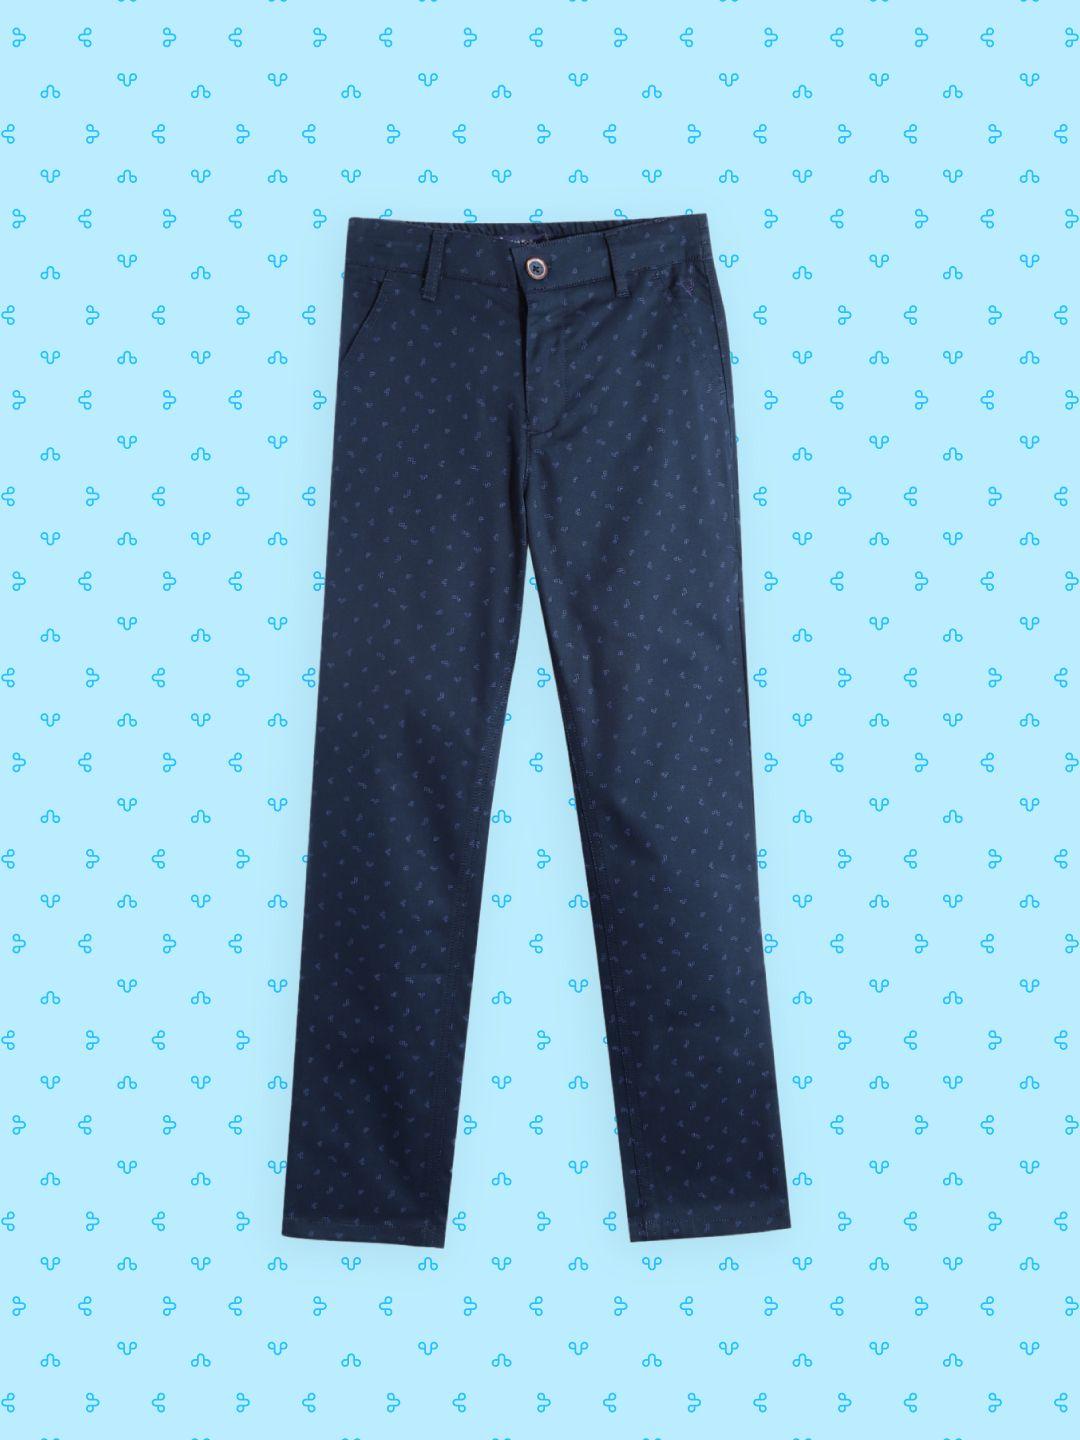 Allen Solly Junior Boys Navy Blue Printed Chino Trousers